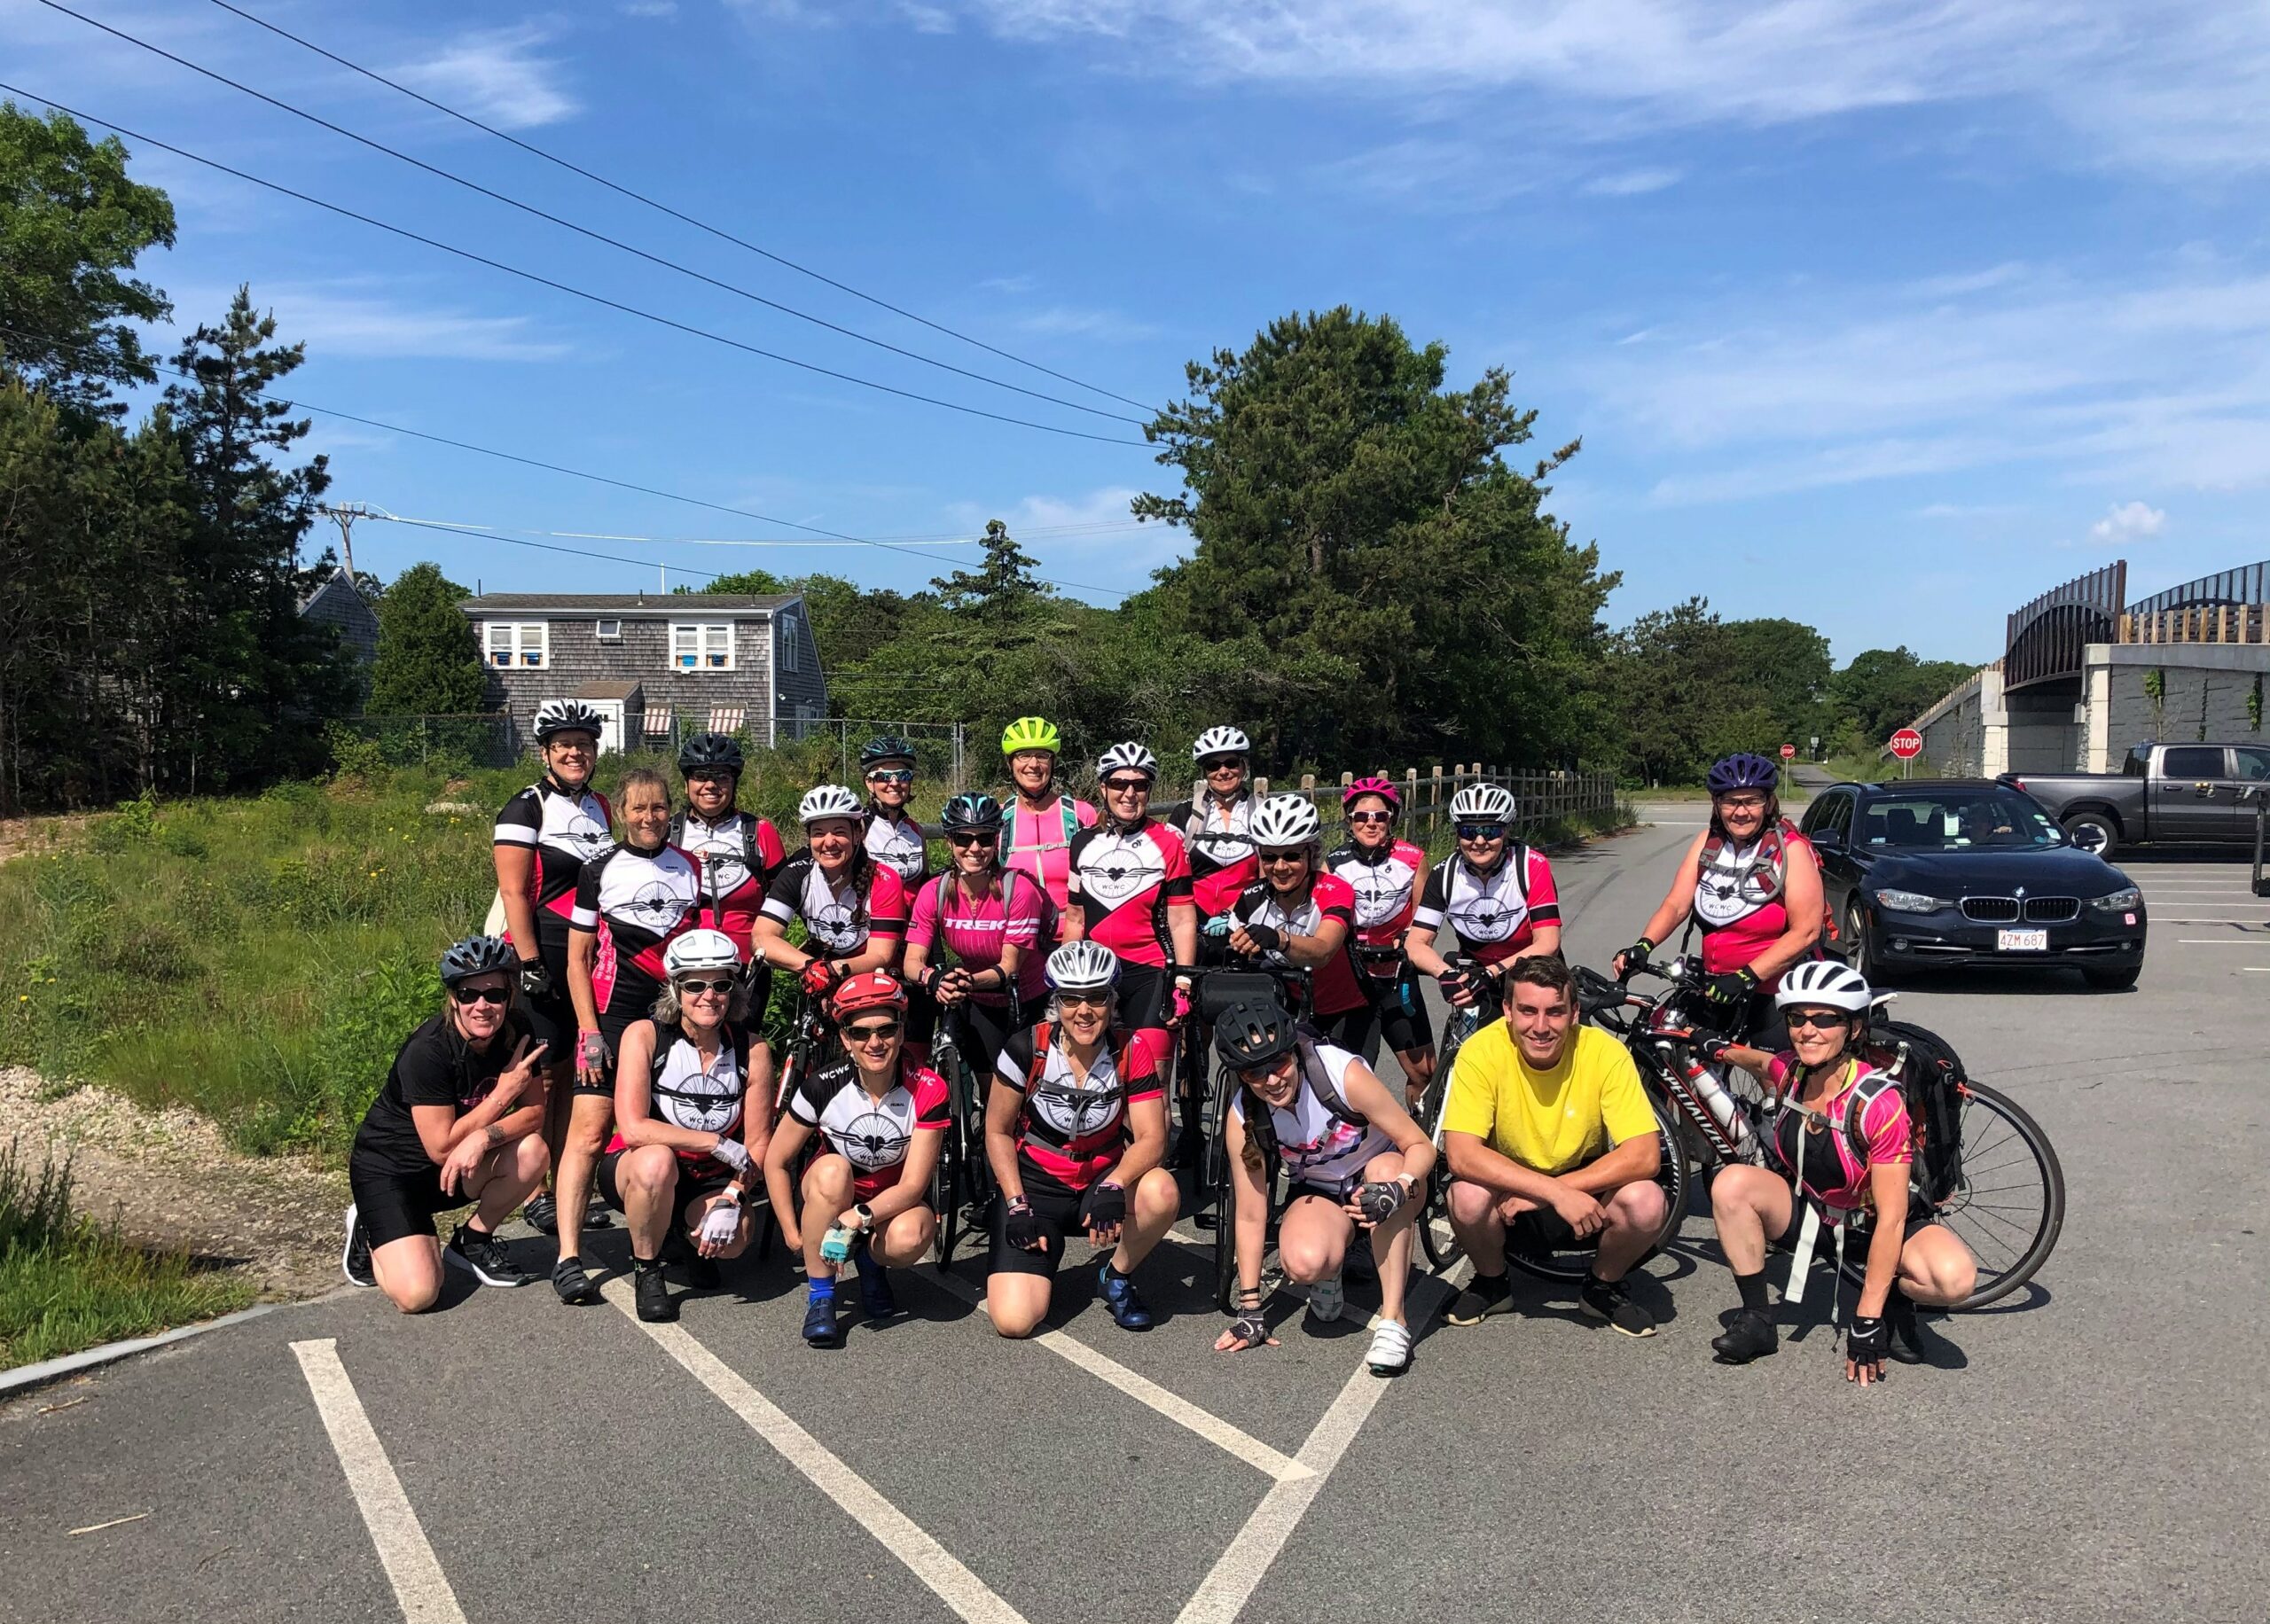 The group grows to 18 for the Wrentham to Provincetown legs of the trek. They pose at a bike path in Yarmouth with Travis Mortell (in yellow shirt), who transported all of the gear.